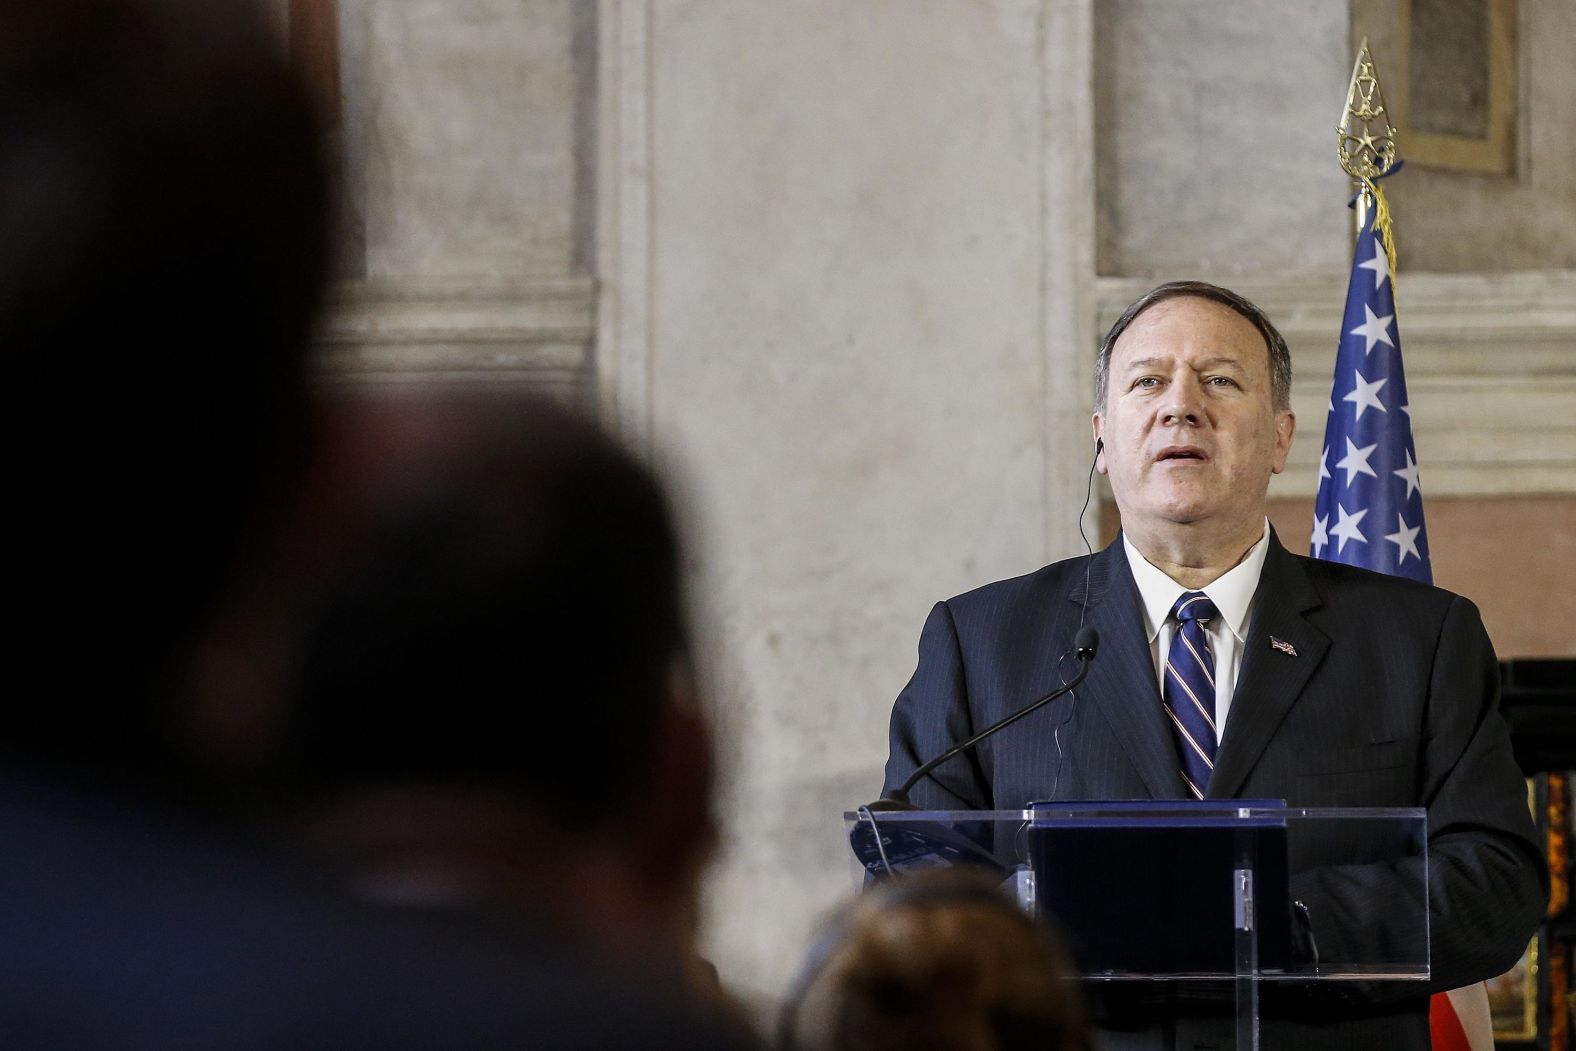 US Secretary of State Mike Pompeo, in Italy visiting Italy's foreign minister, attends a joint news conference in Rome on October 2. Pompeo <a href="index.php?page=&url=https%3A%2F%2Fwww.cnn.com%2F2019%2F10%2F02%2Fpolitics%2Fmike-pompeo-ukraine-call%2Findex.html" target="_blank">confirmed that he was on the July 25 phone call</a> with Trump and Zelensky. Pompeo <a href="index.php?page=&url=https%3A%2F%2Fwww.cnn.com%2F2019%2F09%2F27%2Fpolitics%2Fpompeo-congressional-subpoena-ukraine%2Findex.html" target="_blank">has been subpoenaed</a> by the chairmen of three House committees over his failure to produce documents related to Ukraine.